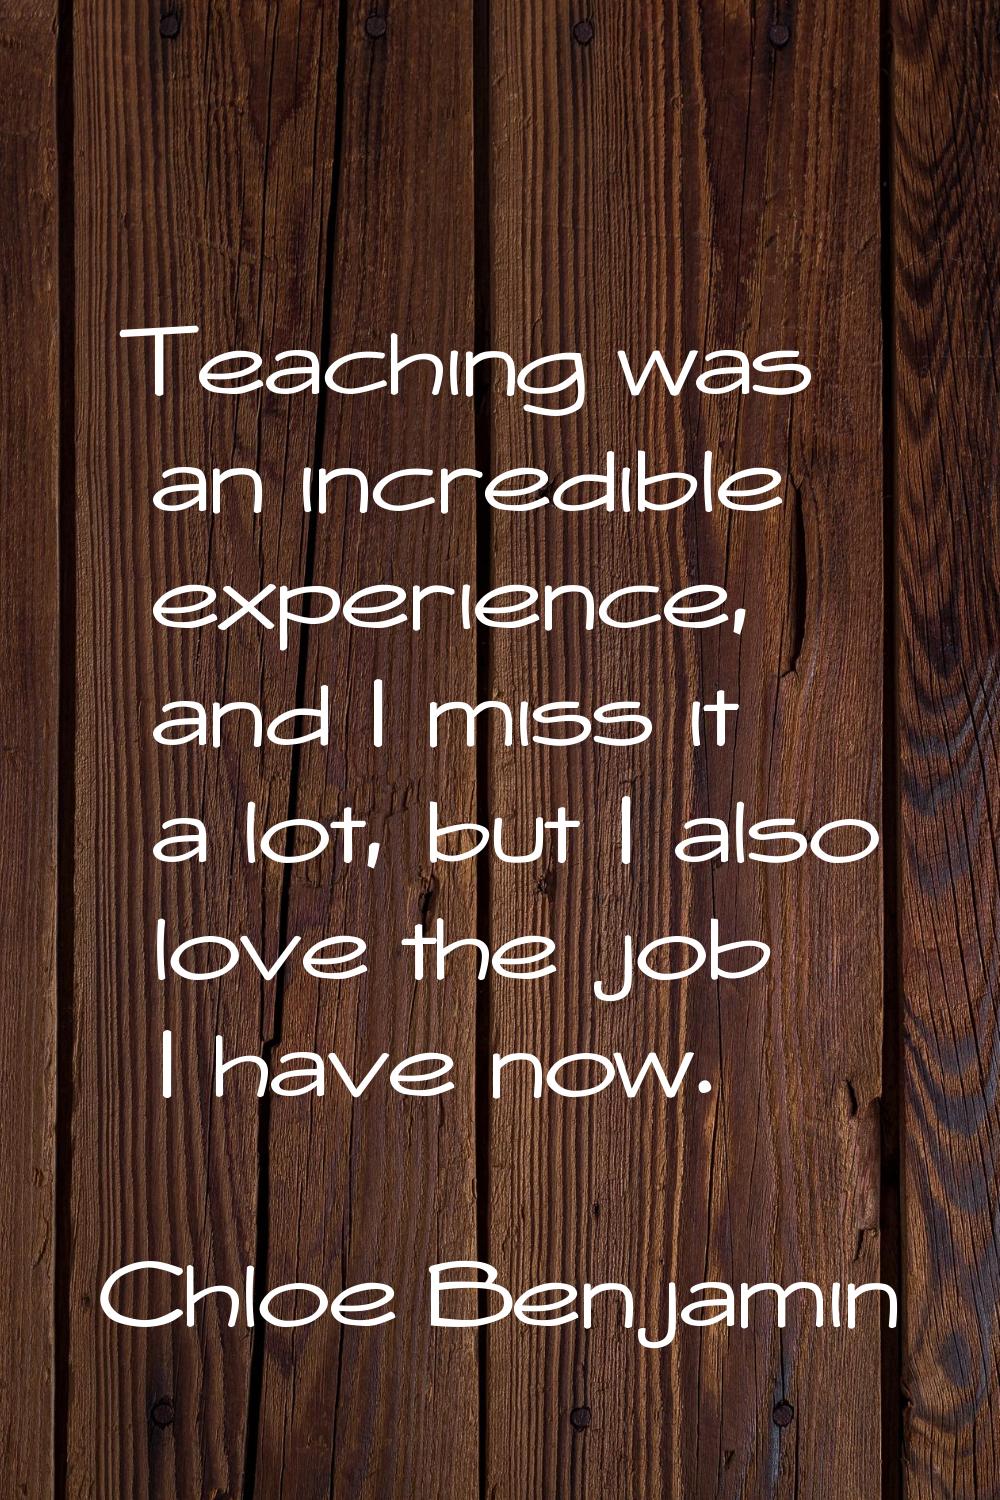 Teaching was an incredible experience, and I miss it a lot, but I also love the job I have now.